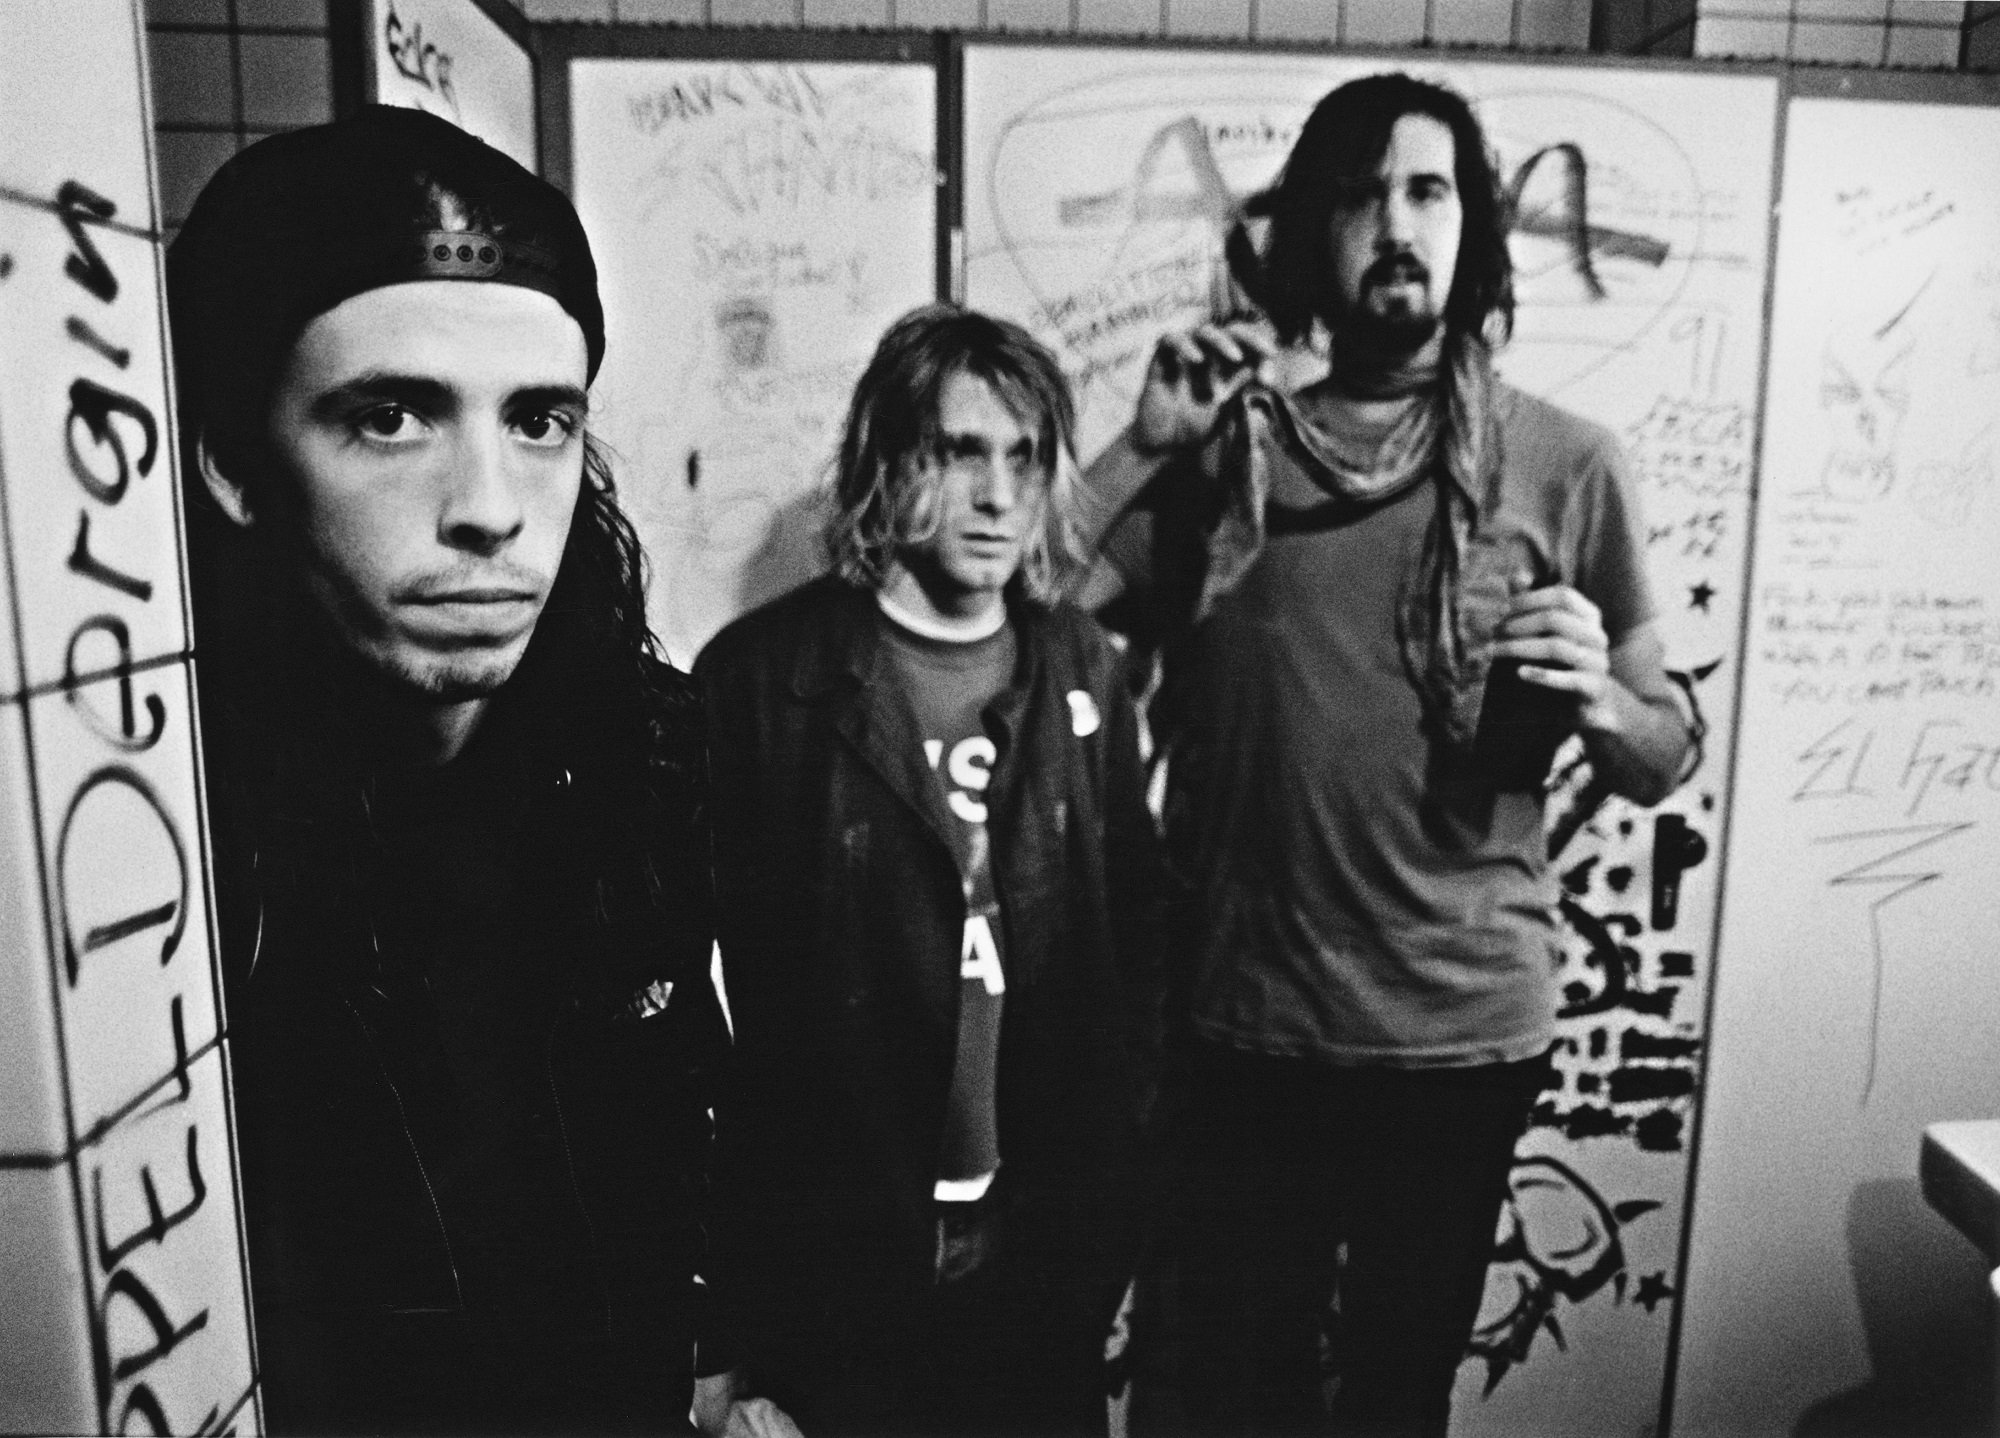 A black-and-white photo of Nirvana members Dave Grohl, Kurt Cobain, and Krist Novoselic